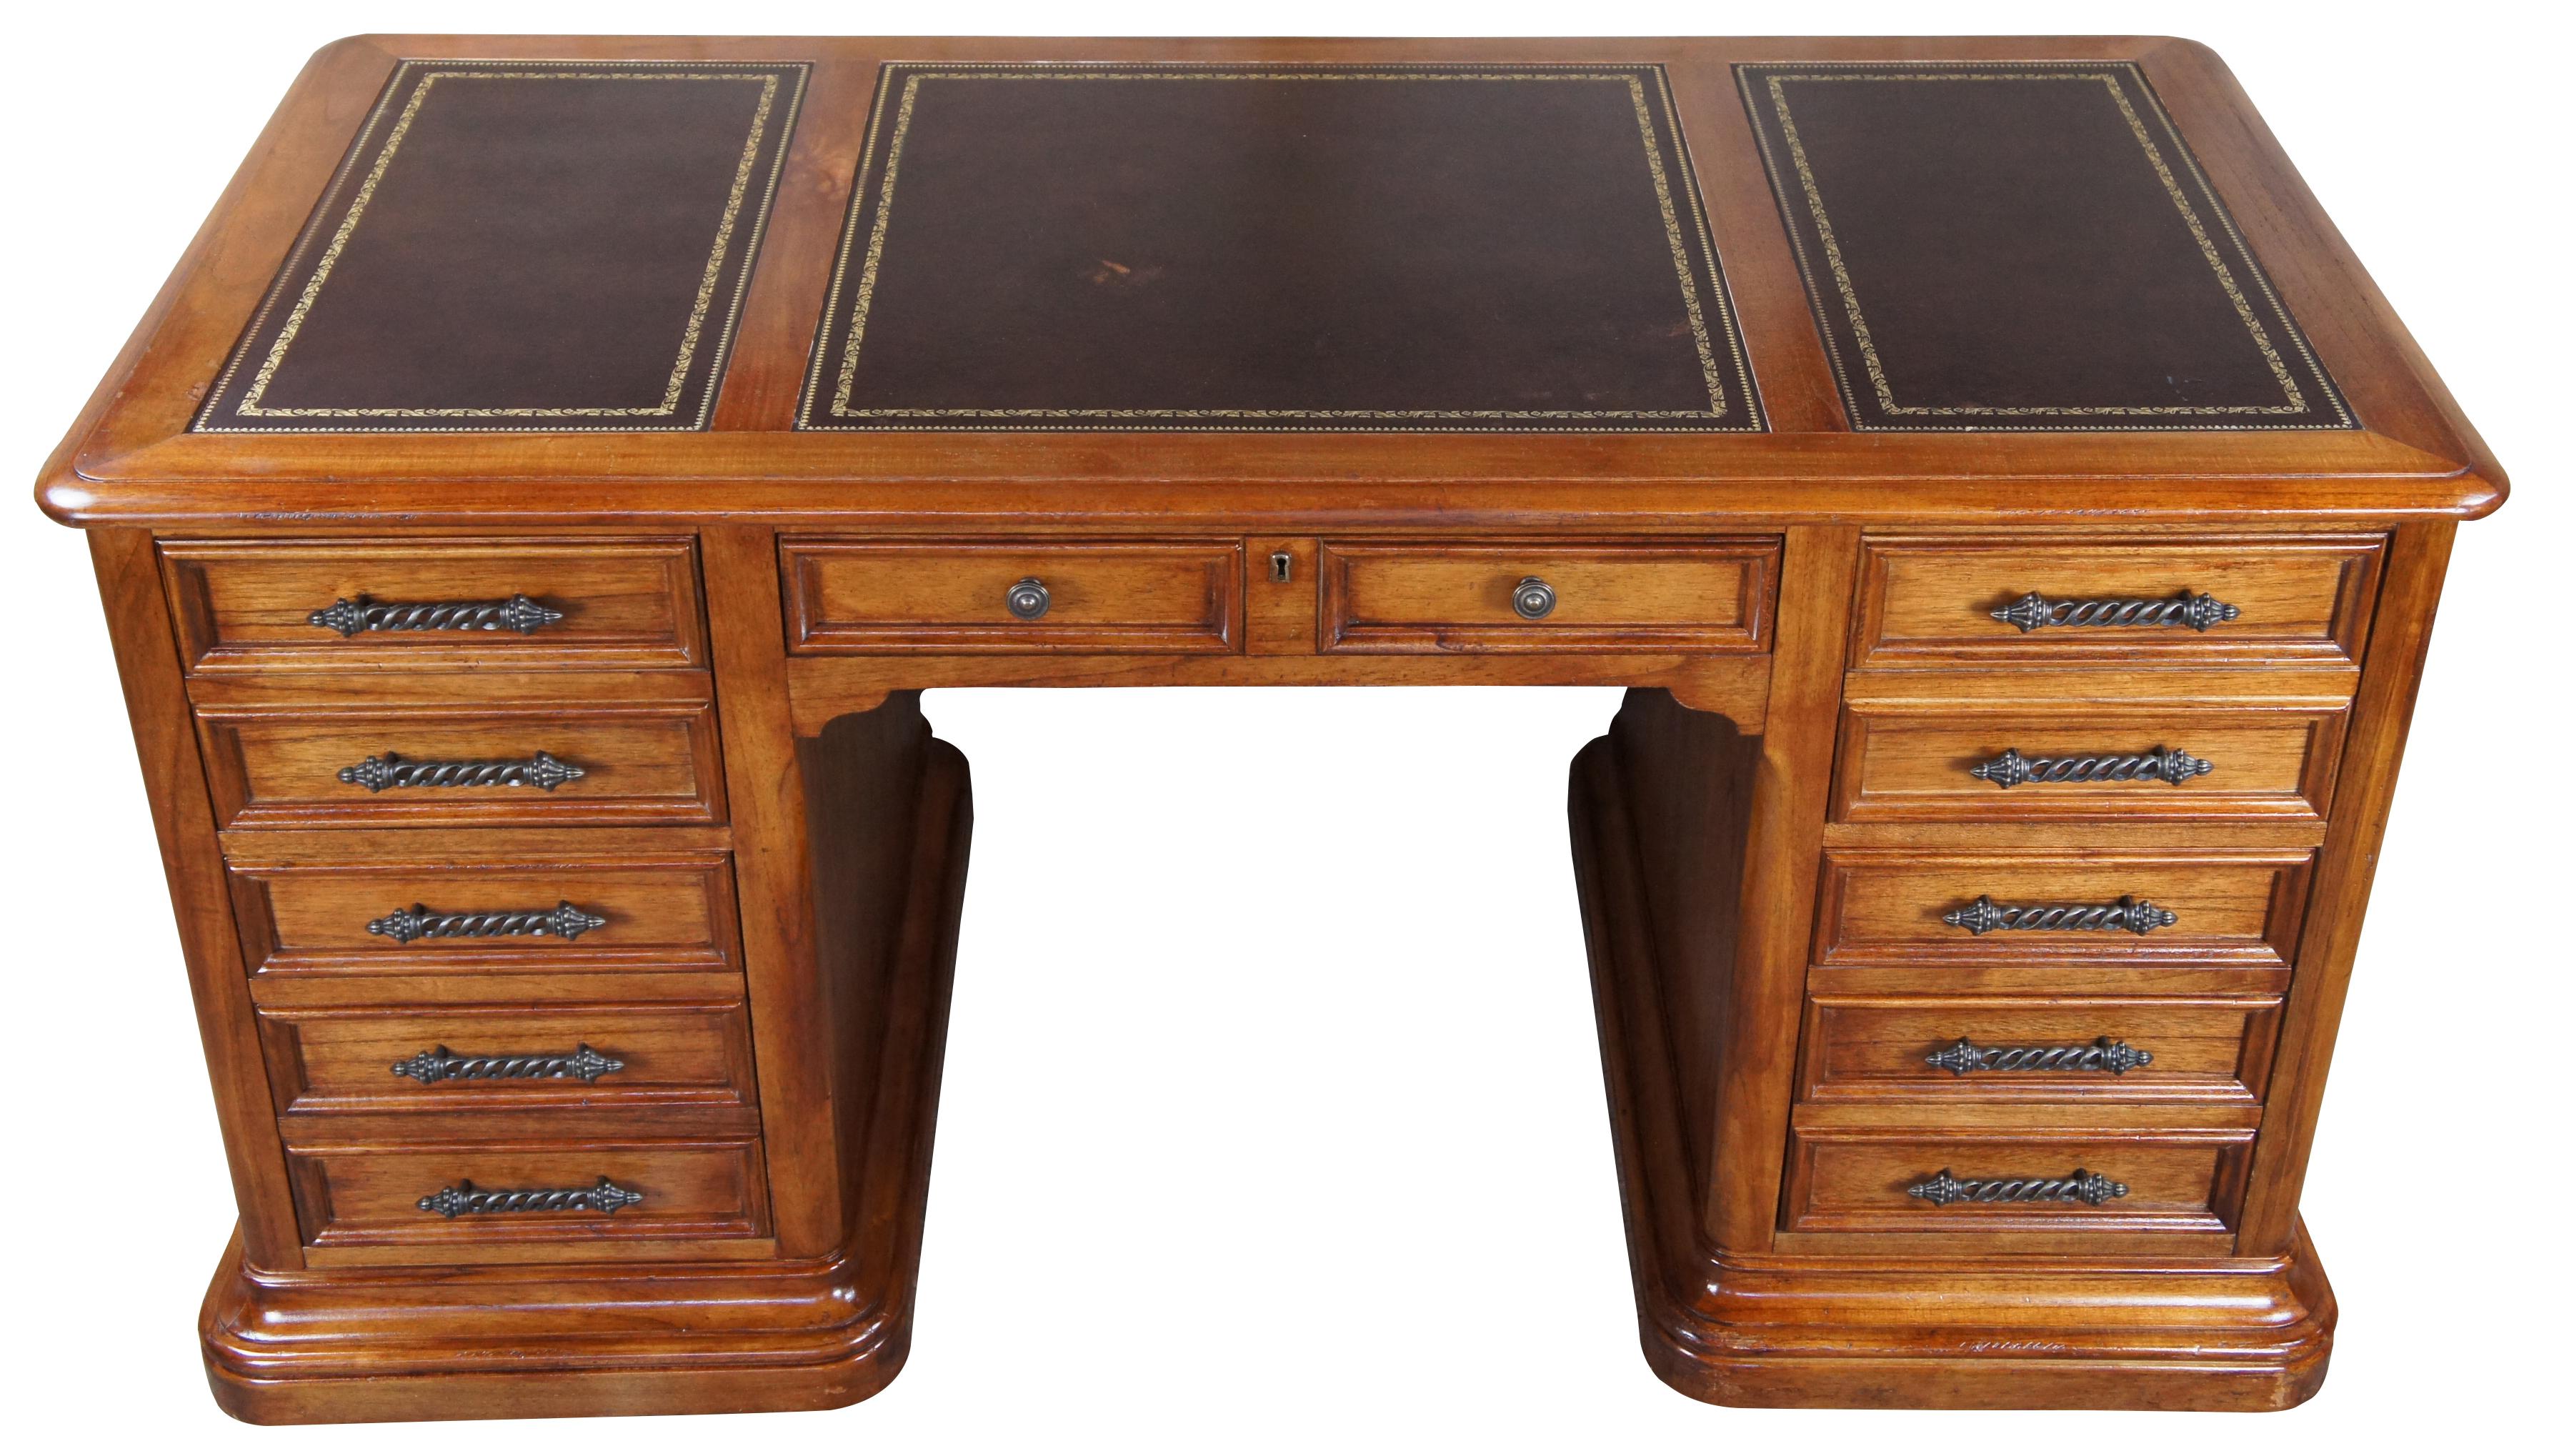 Hekman oak executive office desk. Features a brown and gold tooled leather top 5 drawers and barley twisted hardware. Includes large deepwell drawers with file storage below and a central lockable keyboard drawer. Size: 60